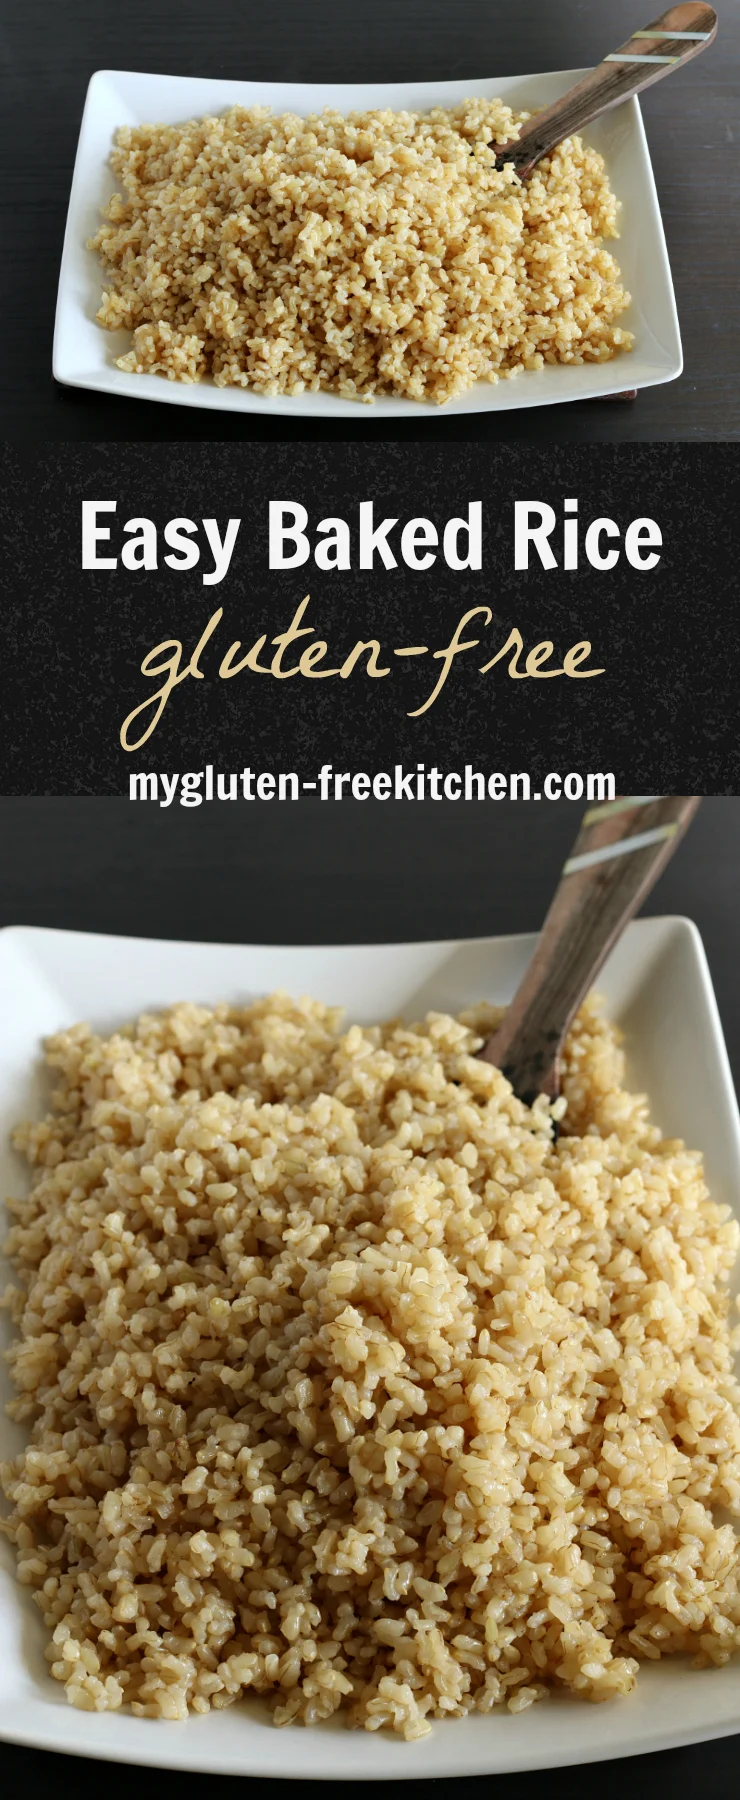 Easy Baked Rice - Two secret ingredients make this easy recipe extra delicious! This is a staple at our house!